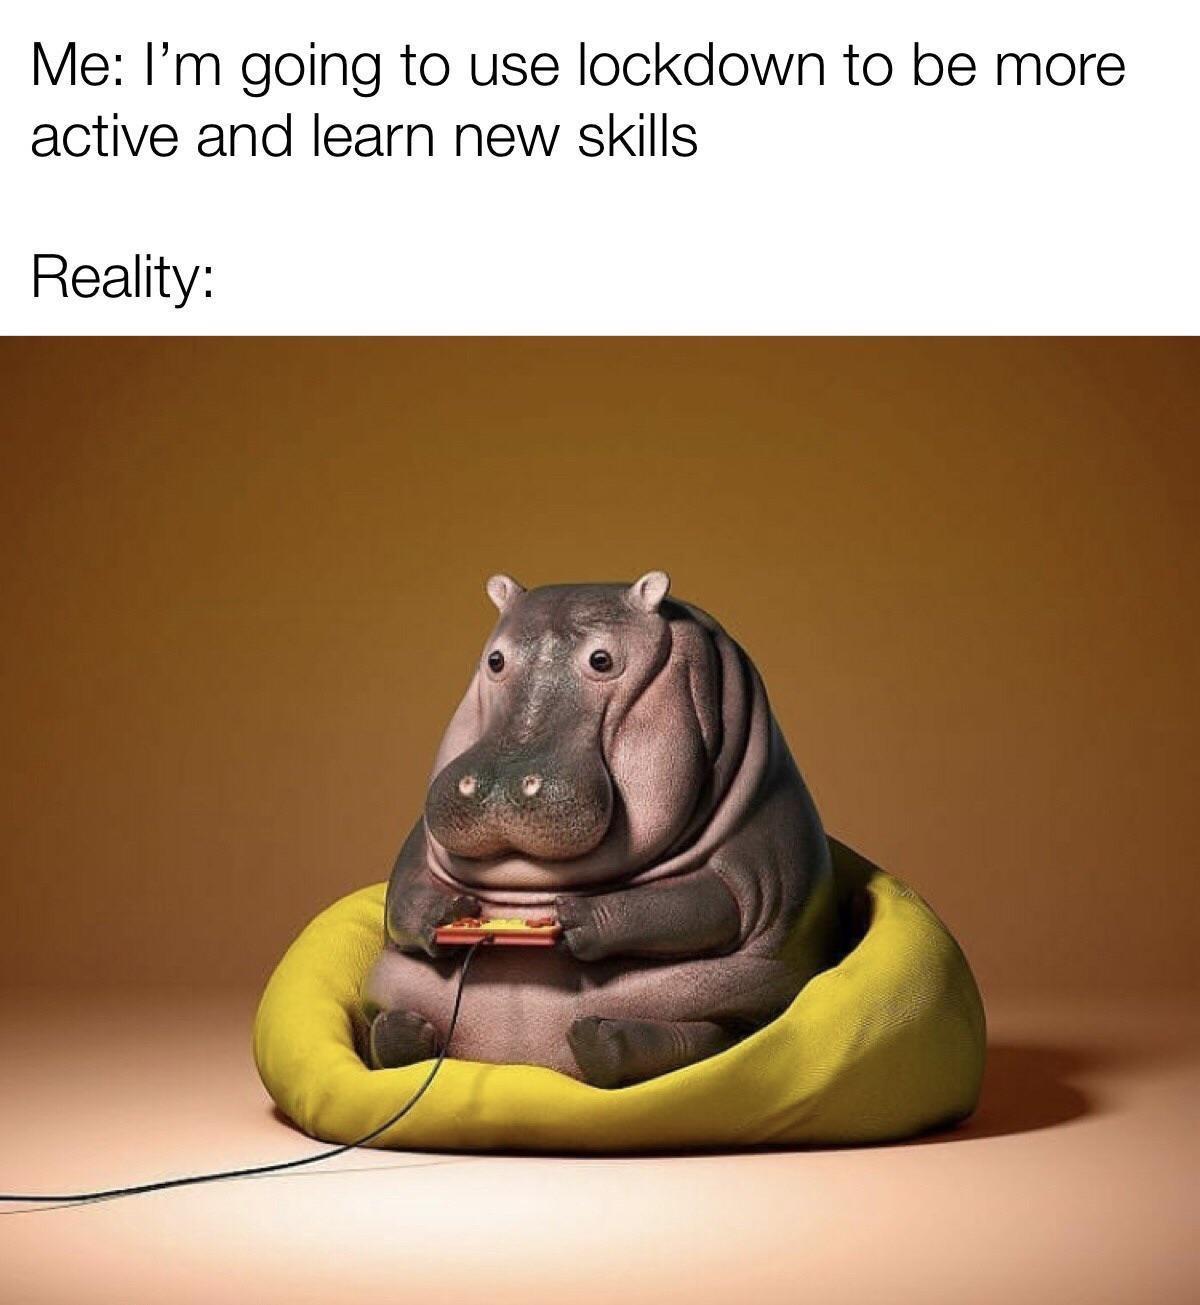 hippo playing games - Me I'm going to use lockdown to be more active and learn new skills Reality